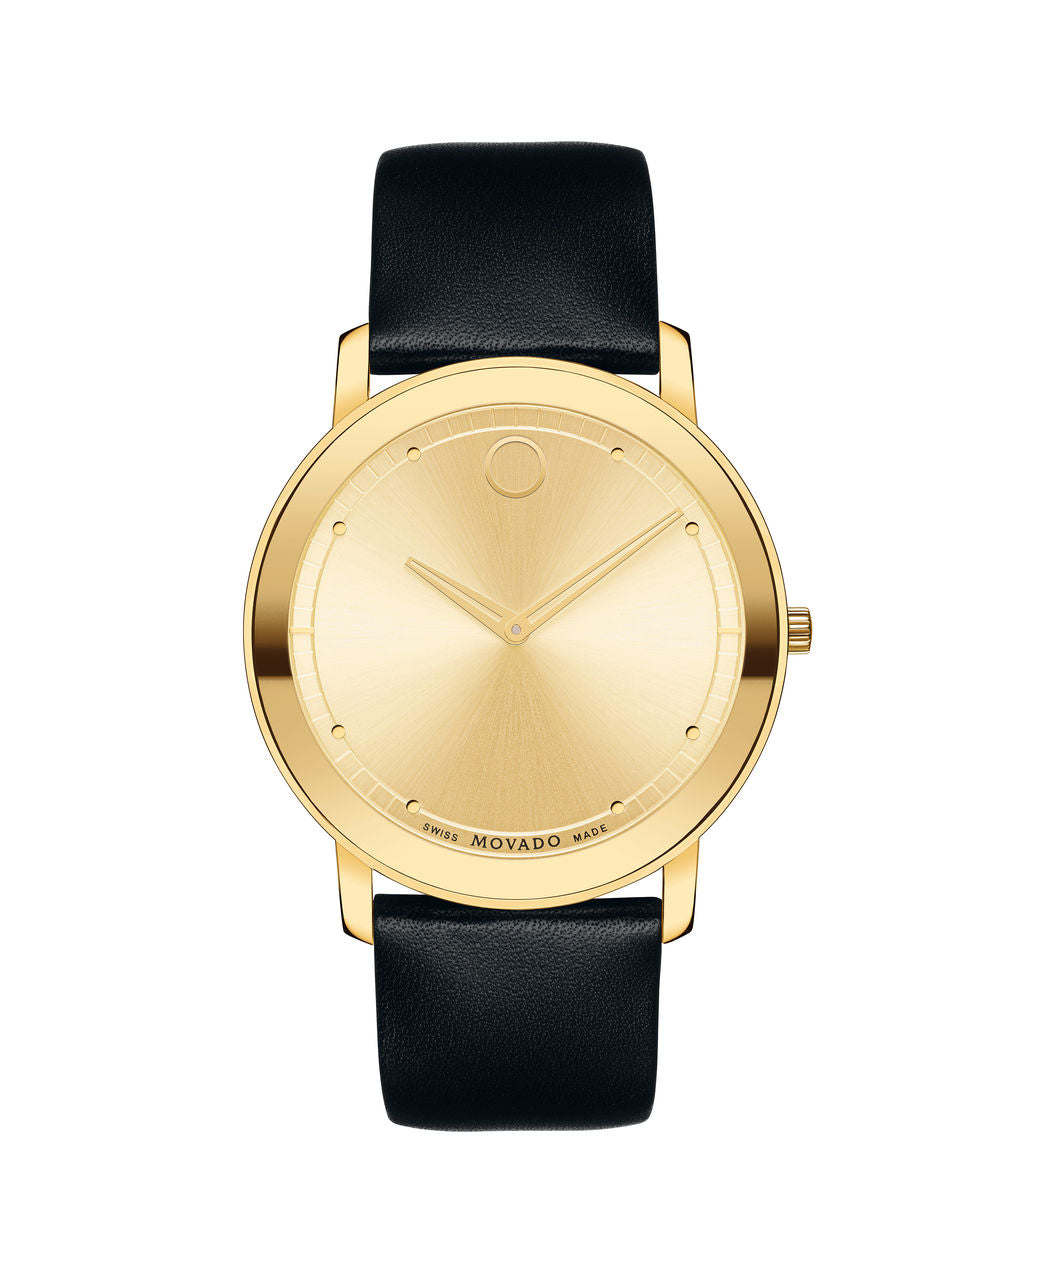 Movado Watch Sapphire Collection - Gold PVD on Black Leather